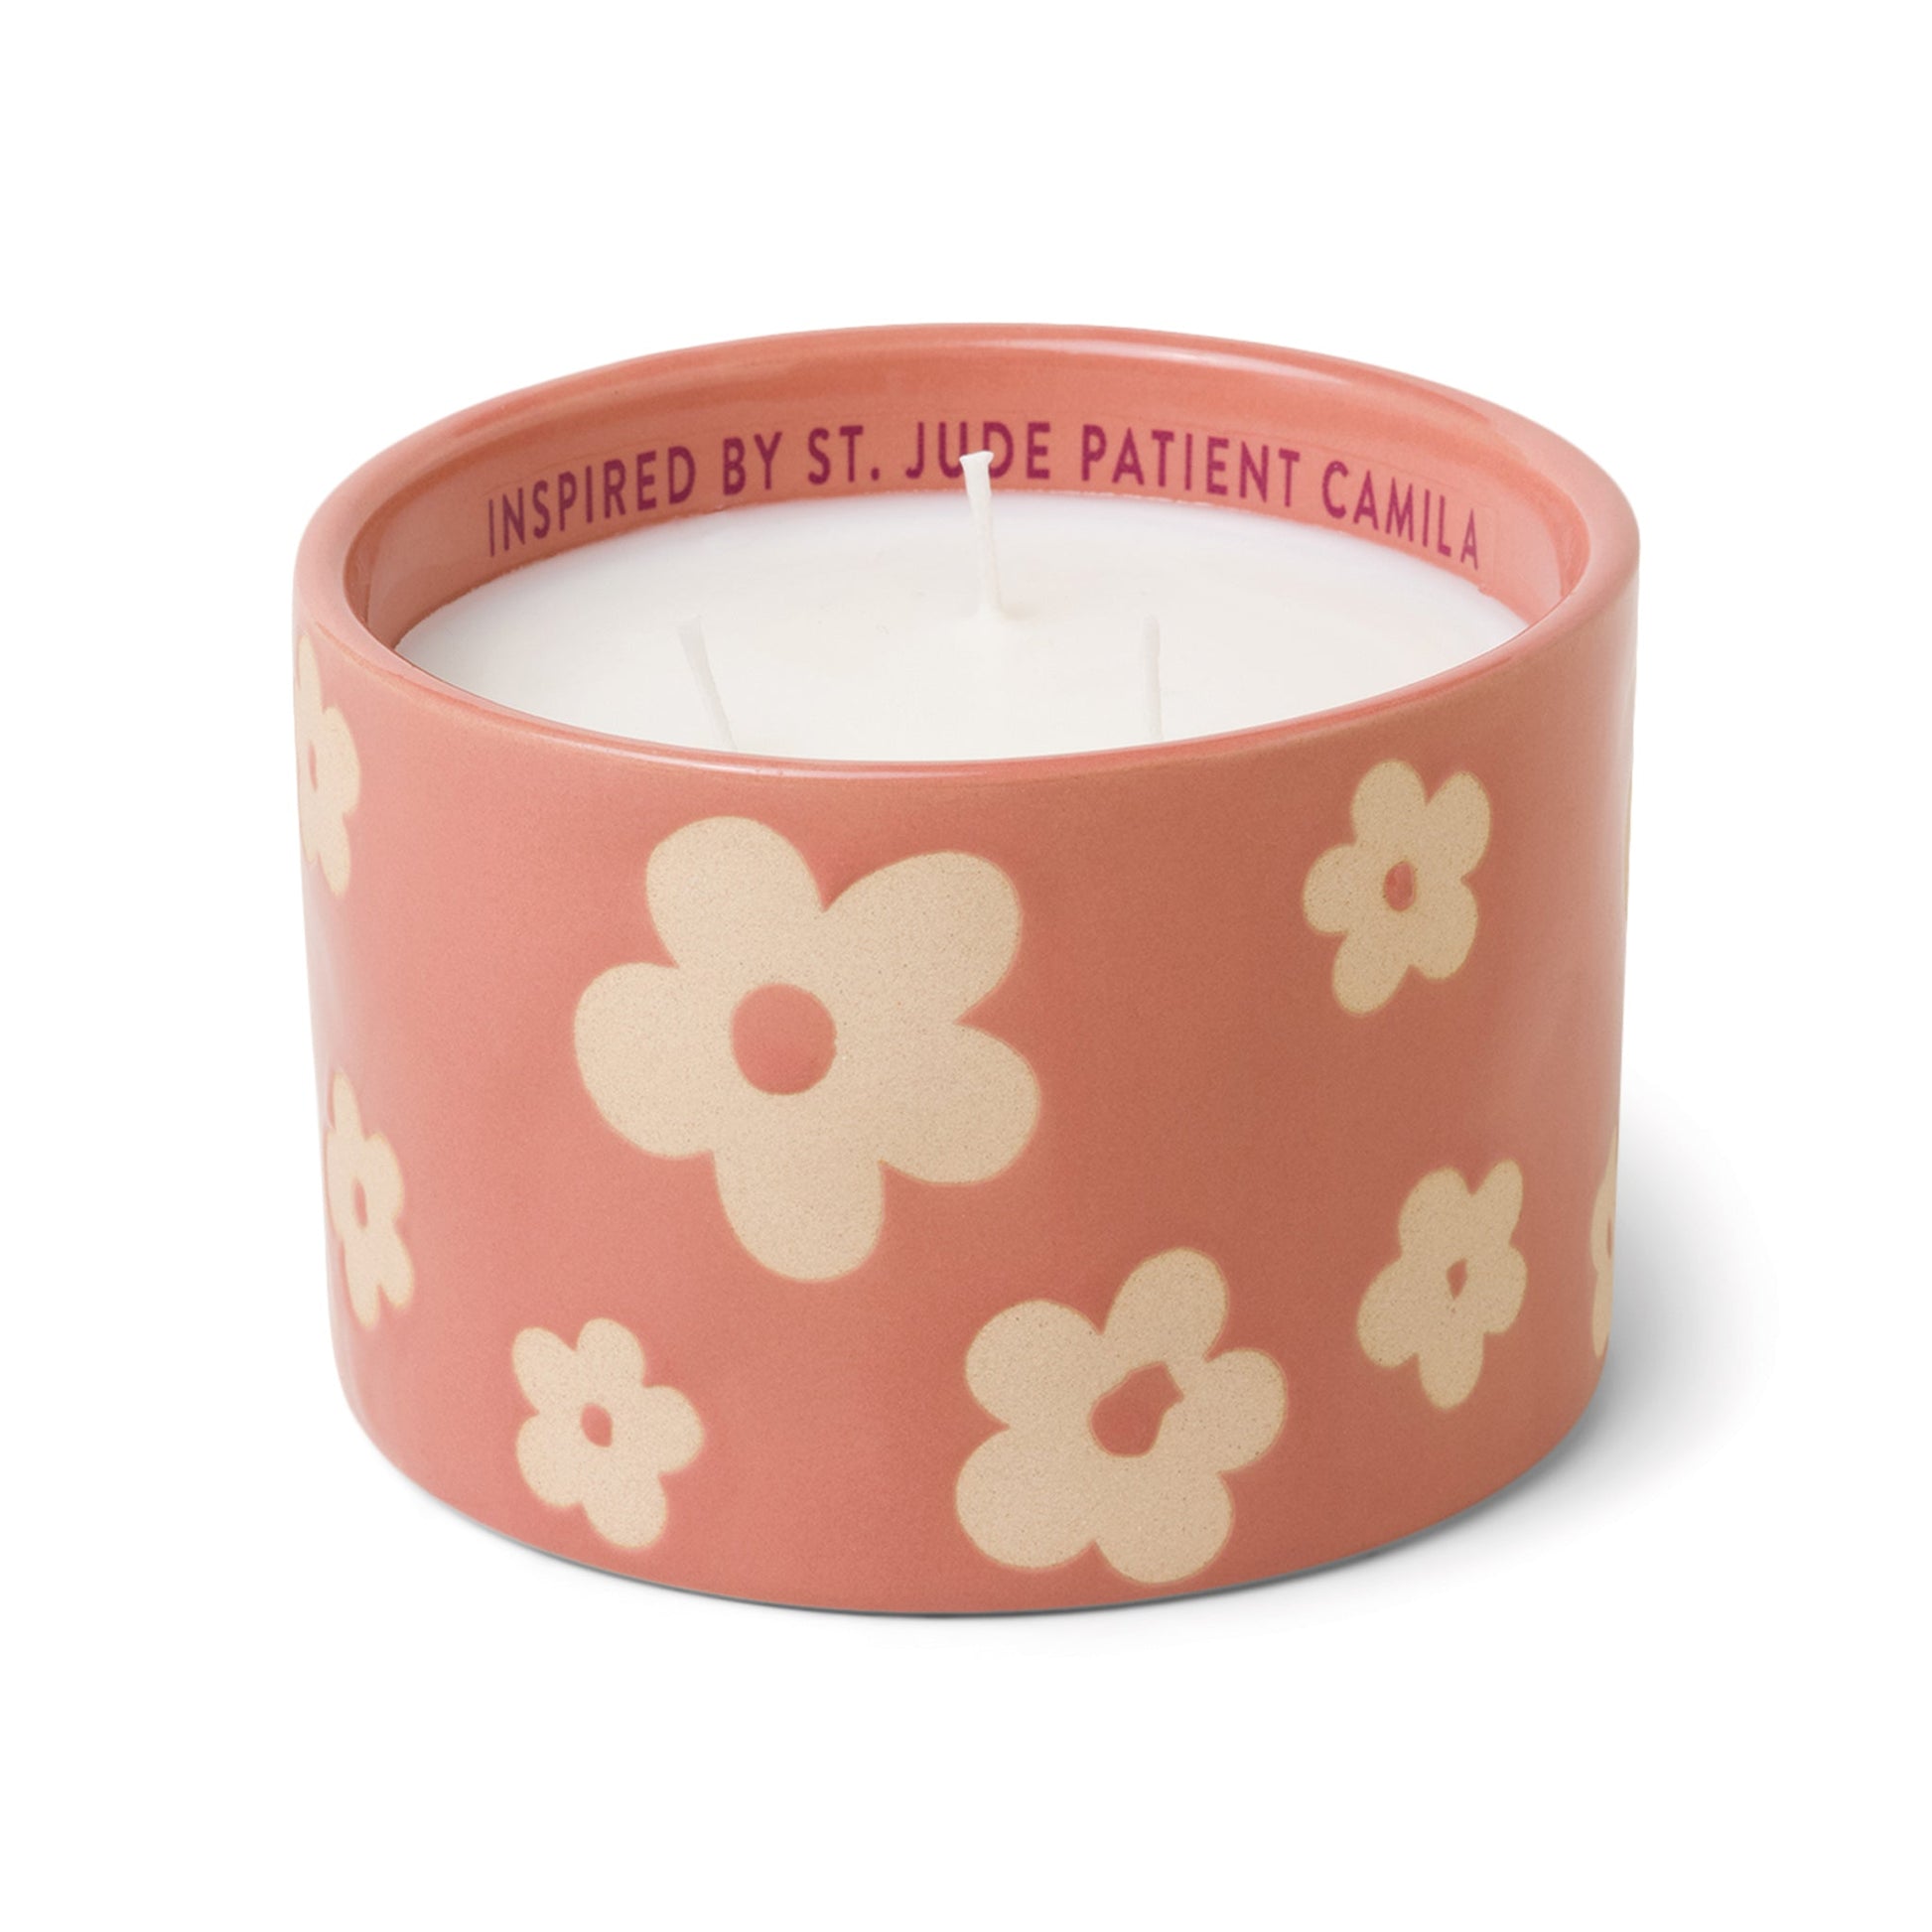 Pink ceramic candle with flowers and white soy wax center with three wicks. Debossed name on back side of the label with text "Inspired by St. Jude patient Yamila". Scented candle on white background